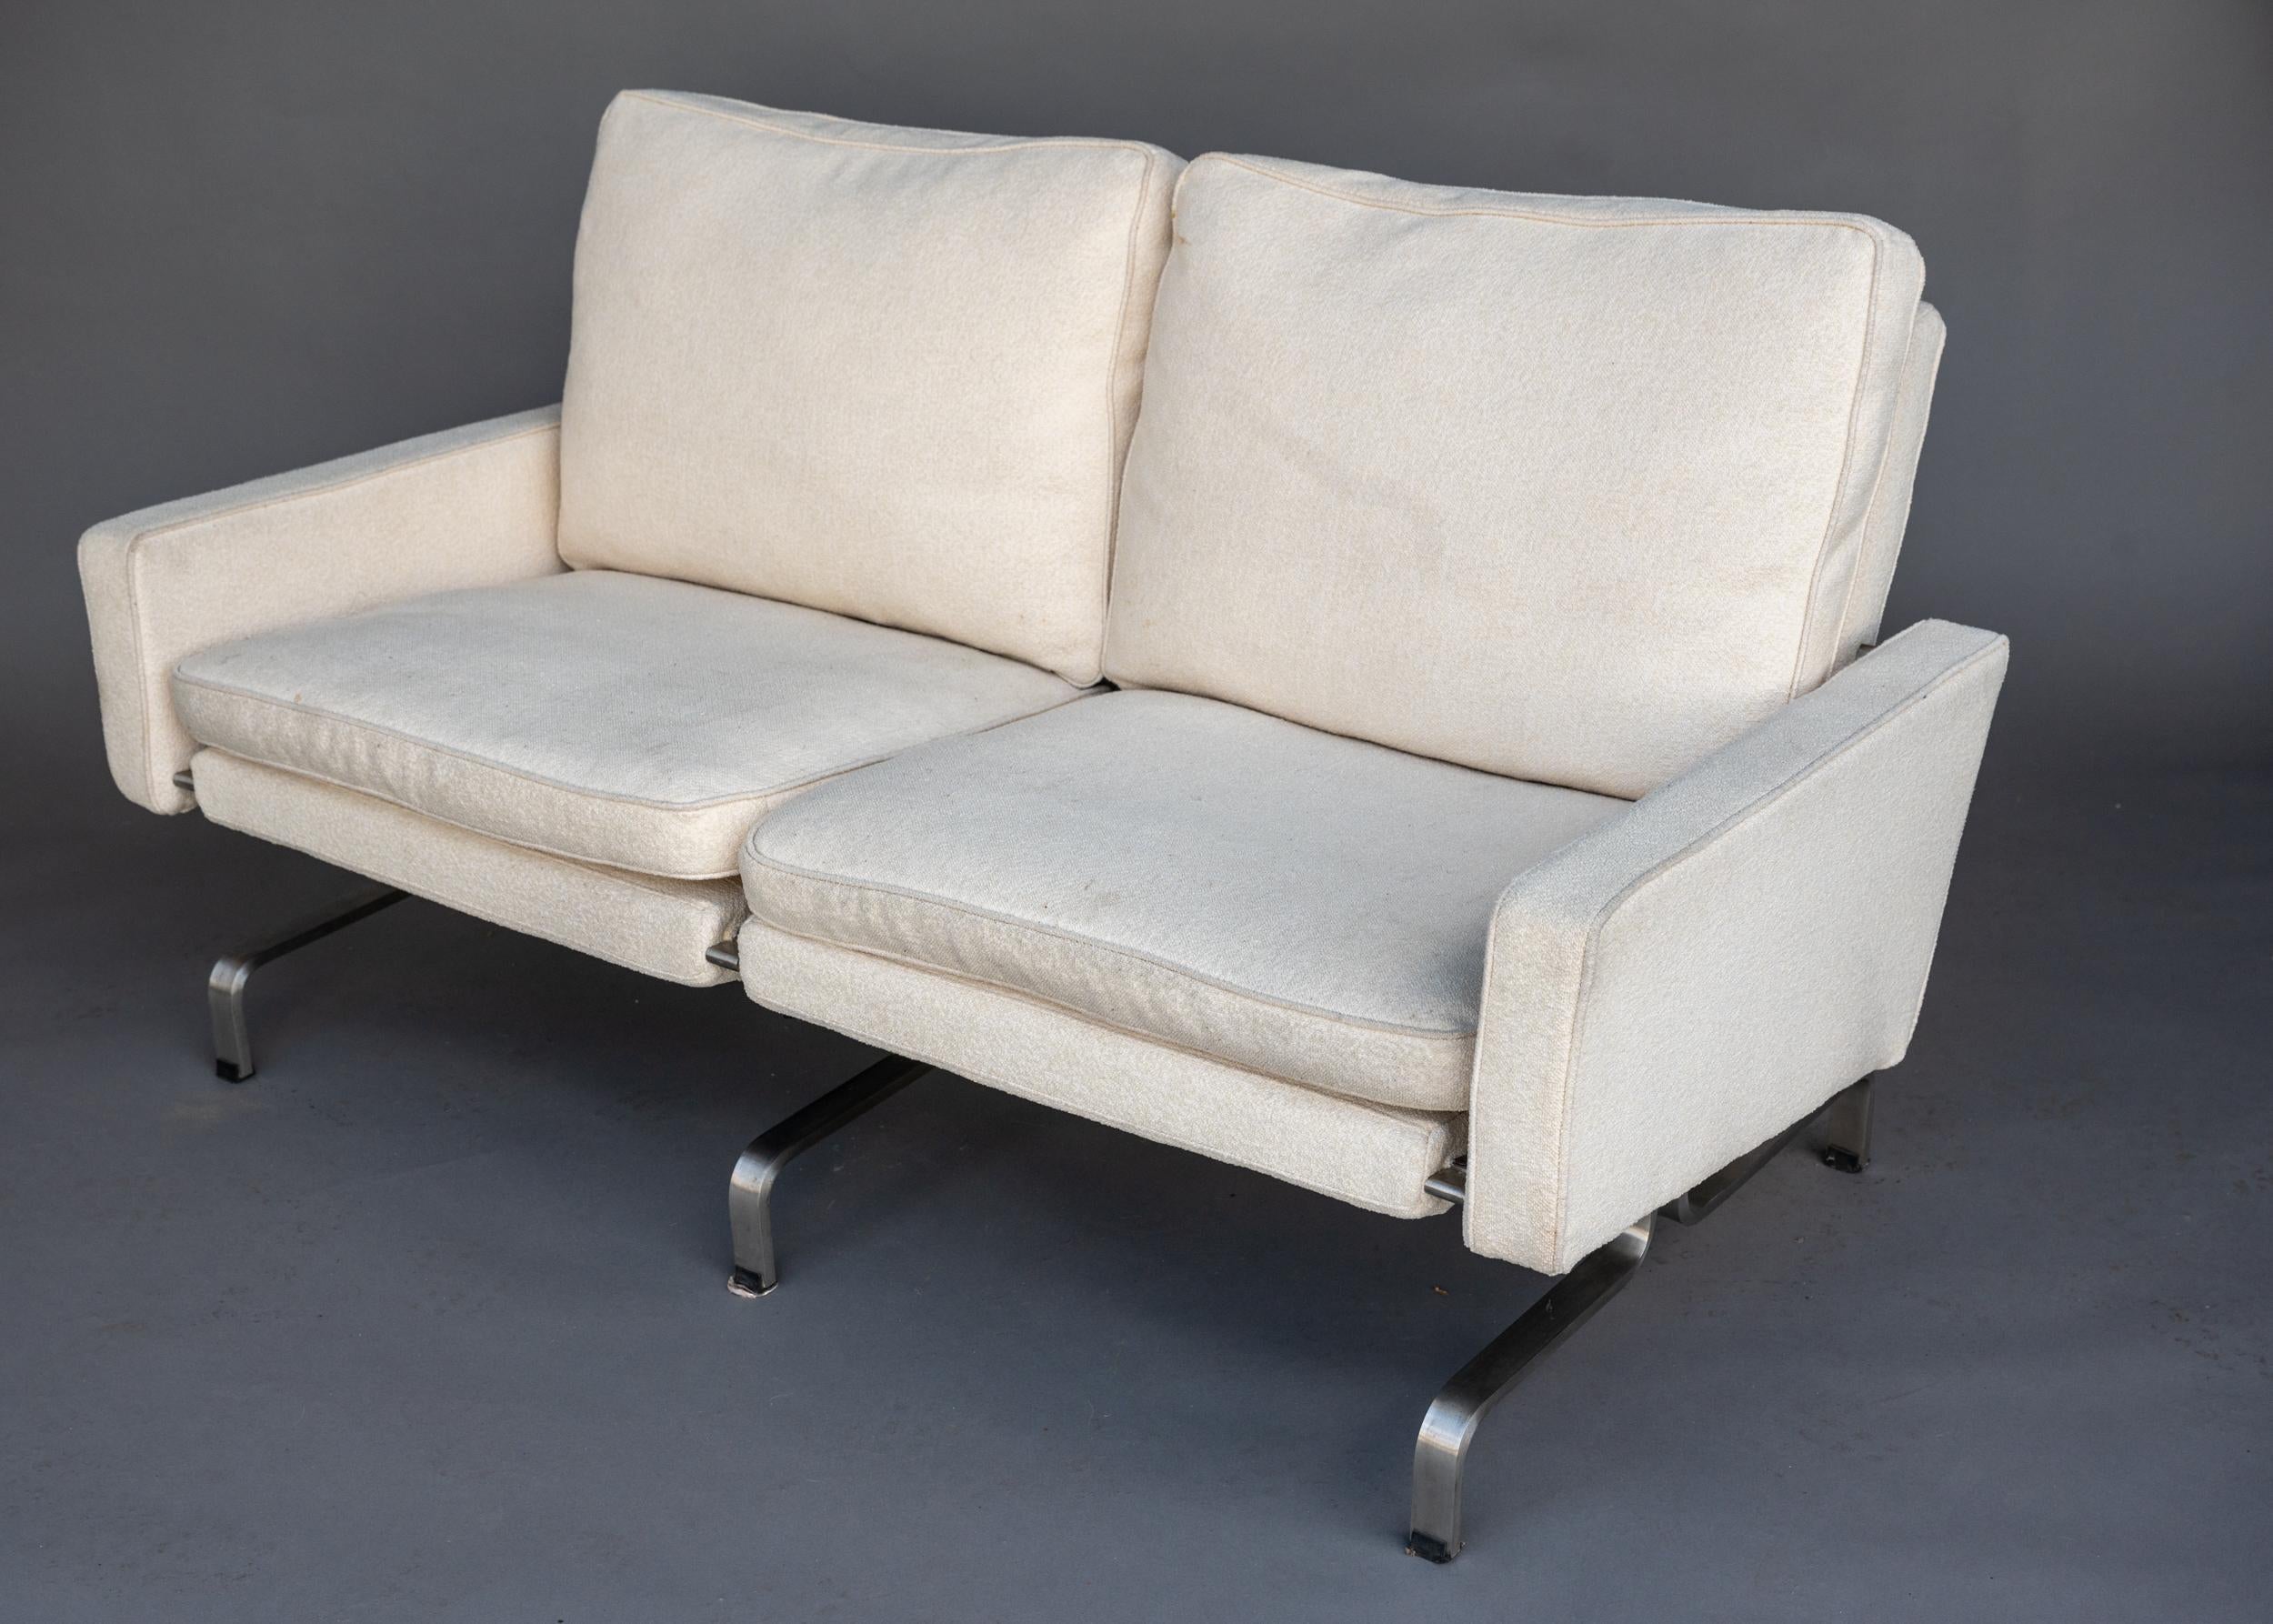 Poul Kjaerholm PK31 Settee in Boucle In Good Condition For Sale In Bridport, CT